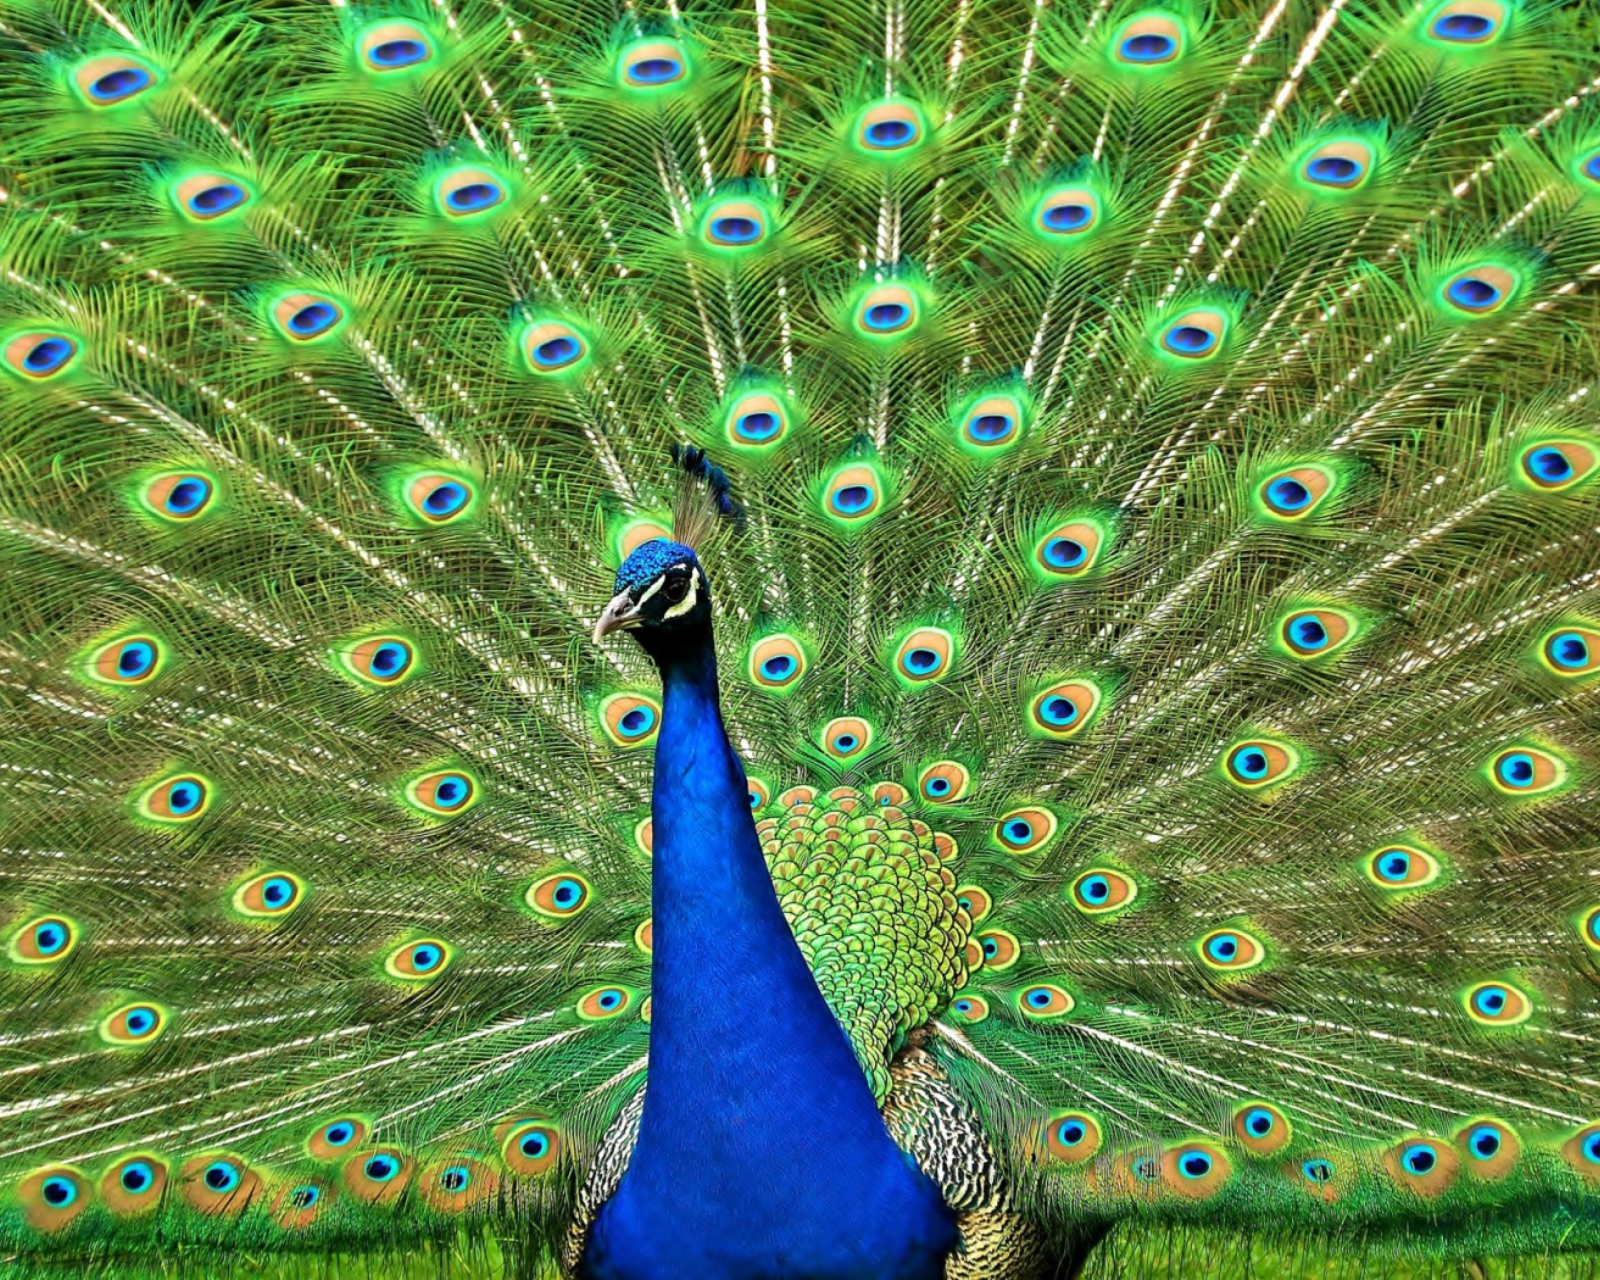 Peacock Tail Feathers wallpaper 1600x1280